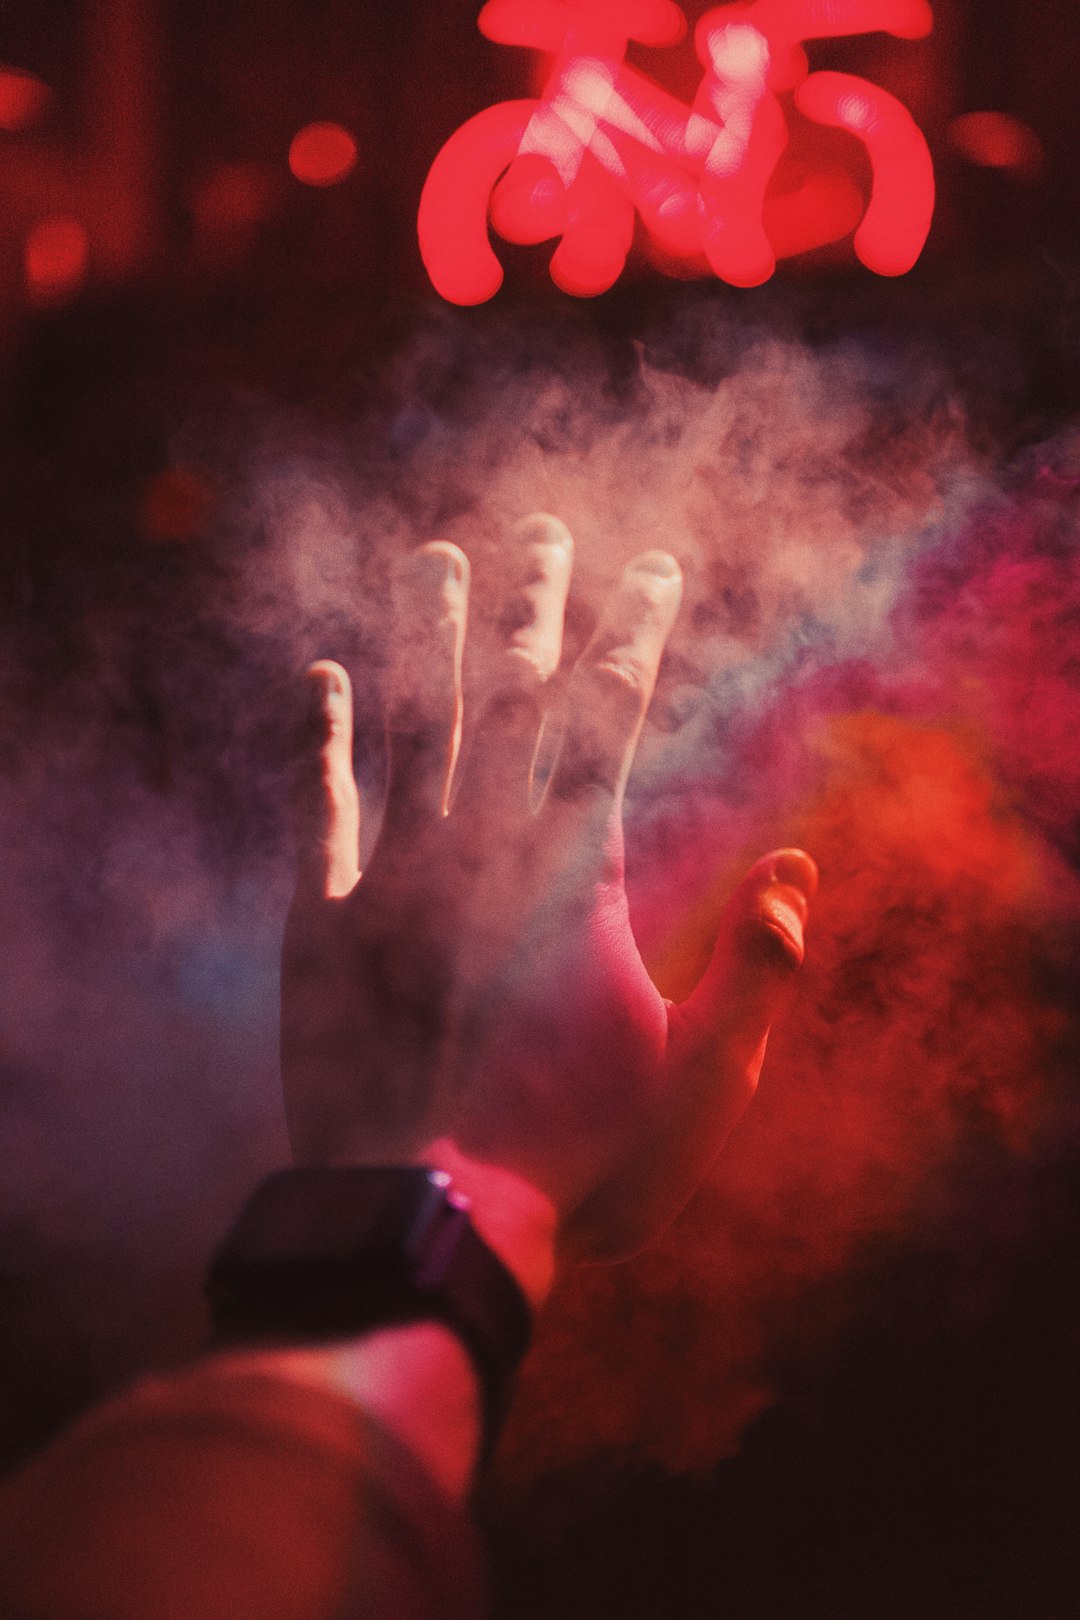 person raising his hands with red and white powder